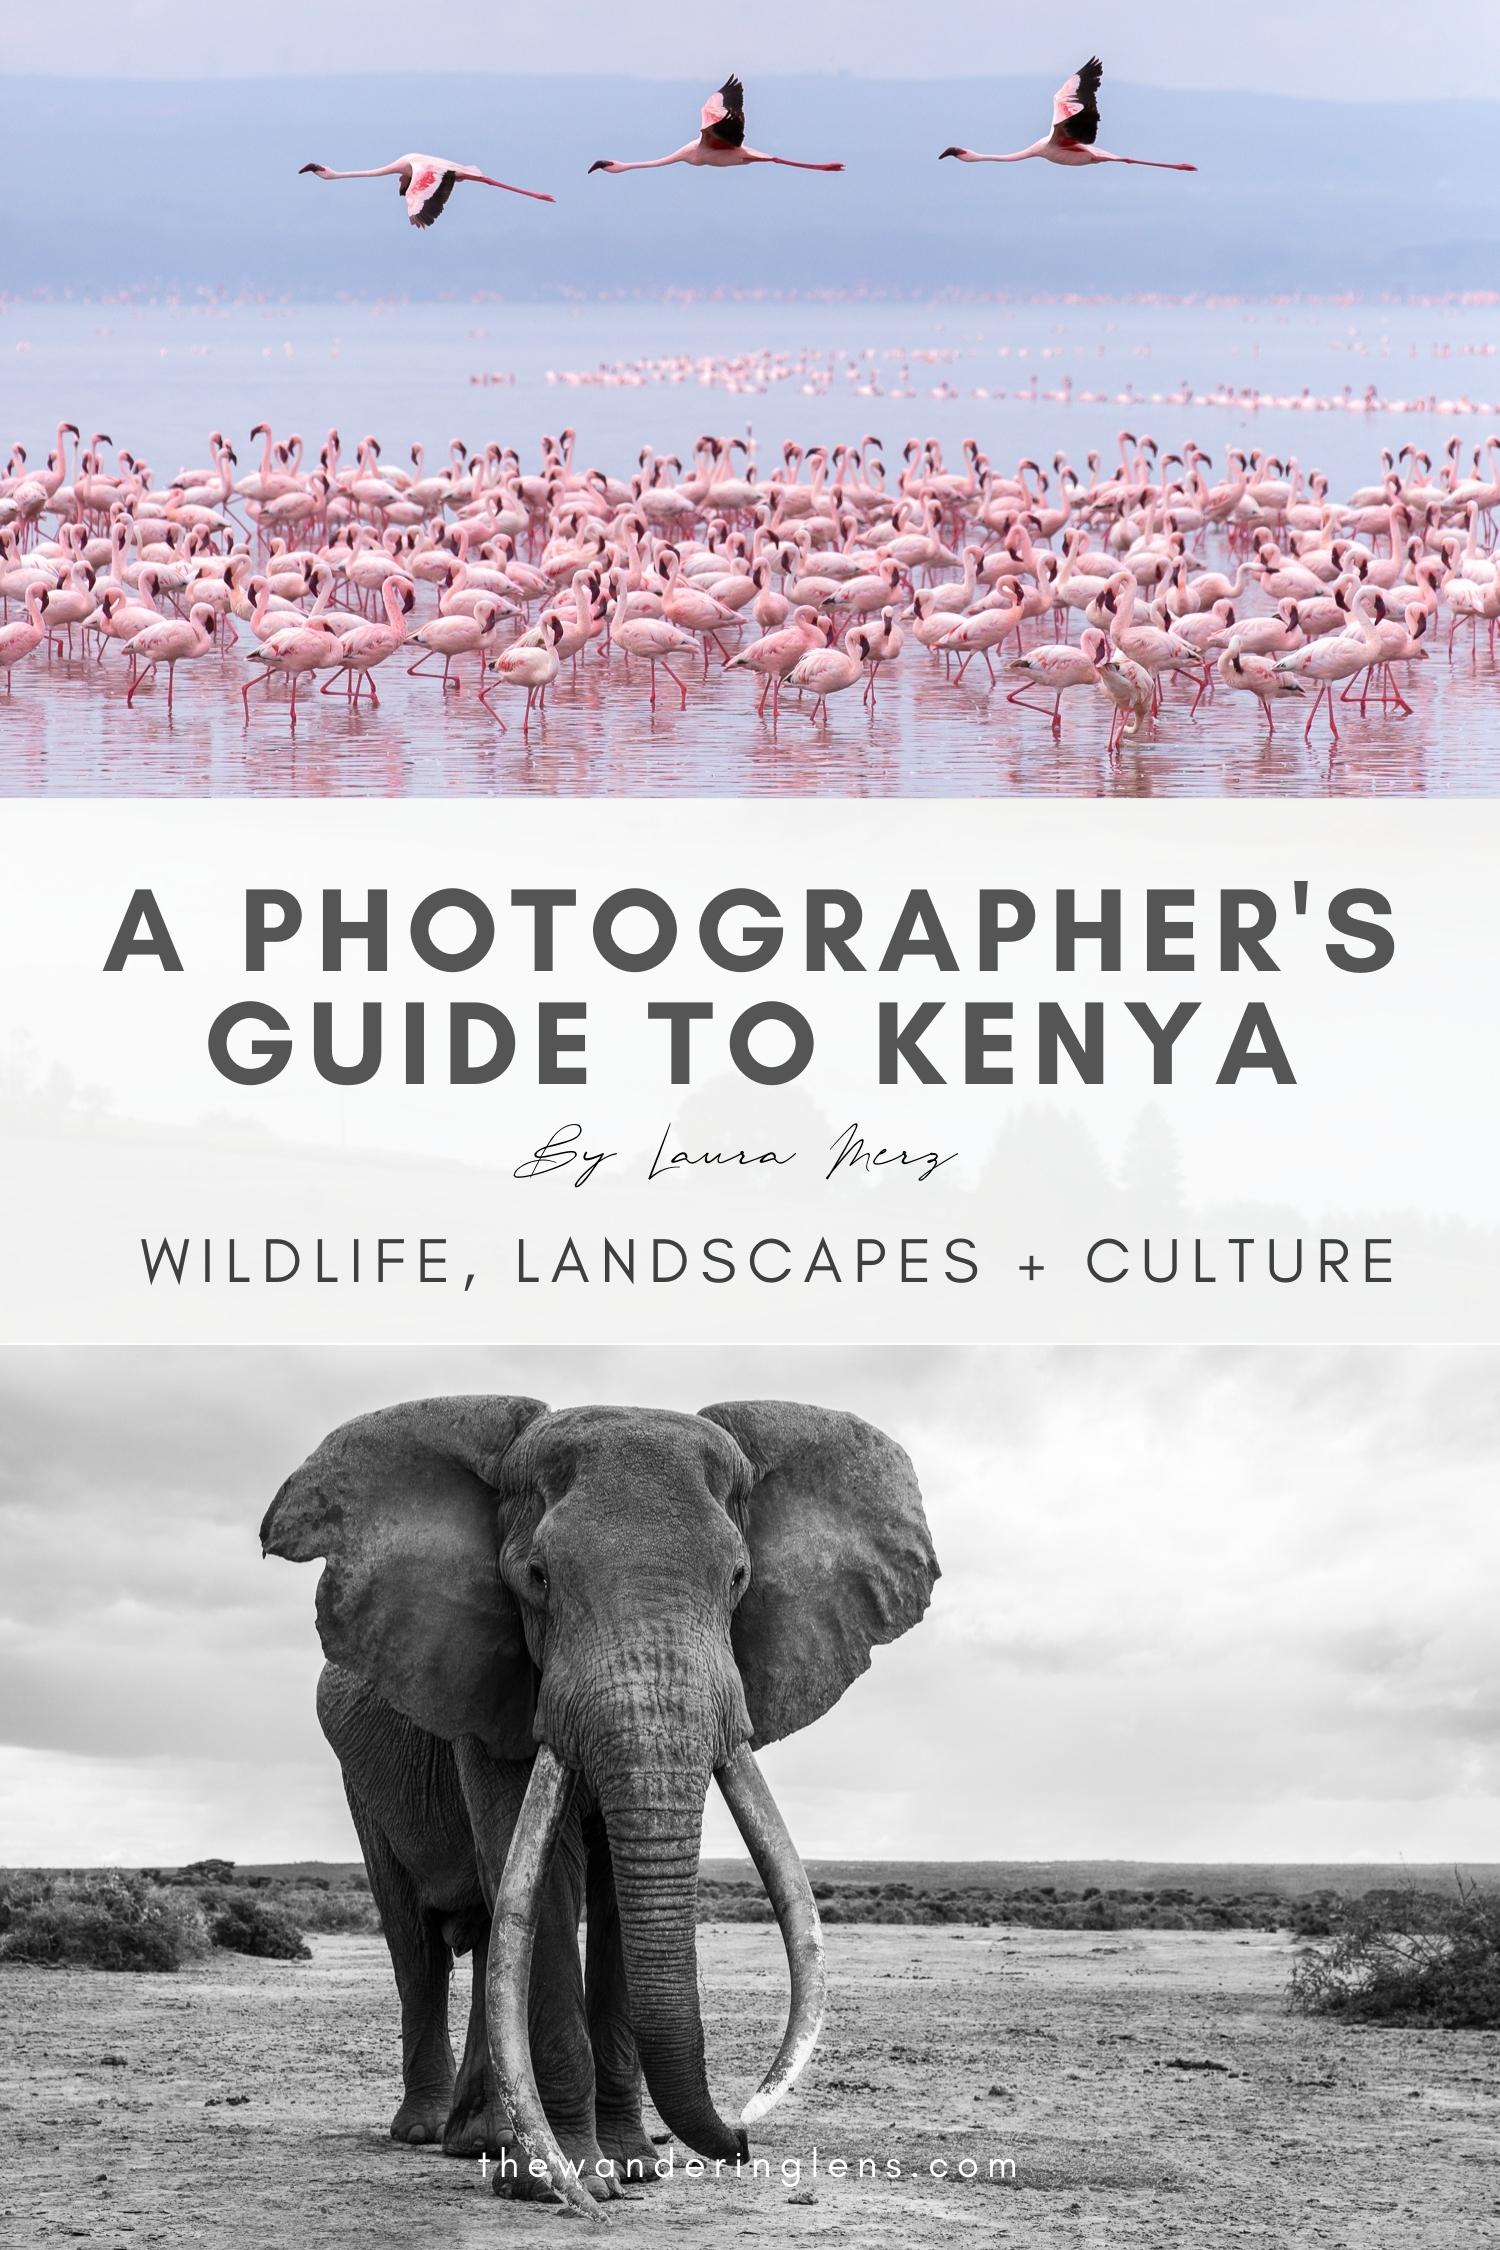 Kenya Photography Guide by Laura Merz